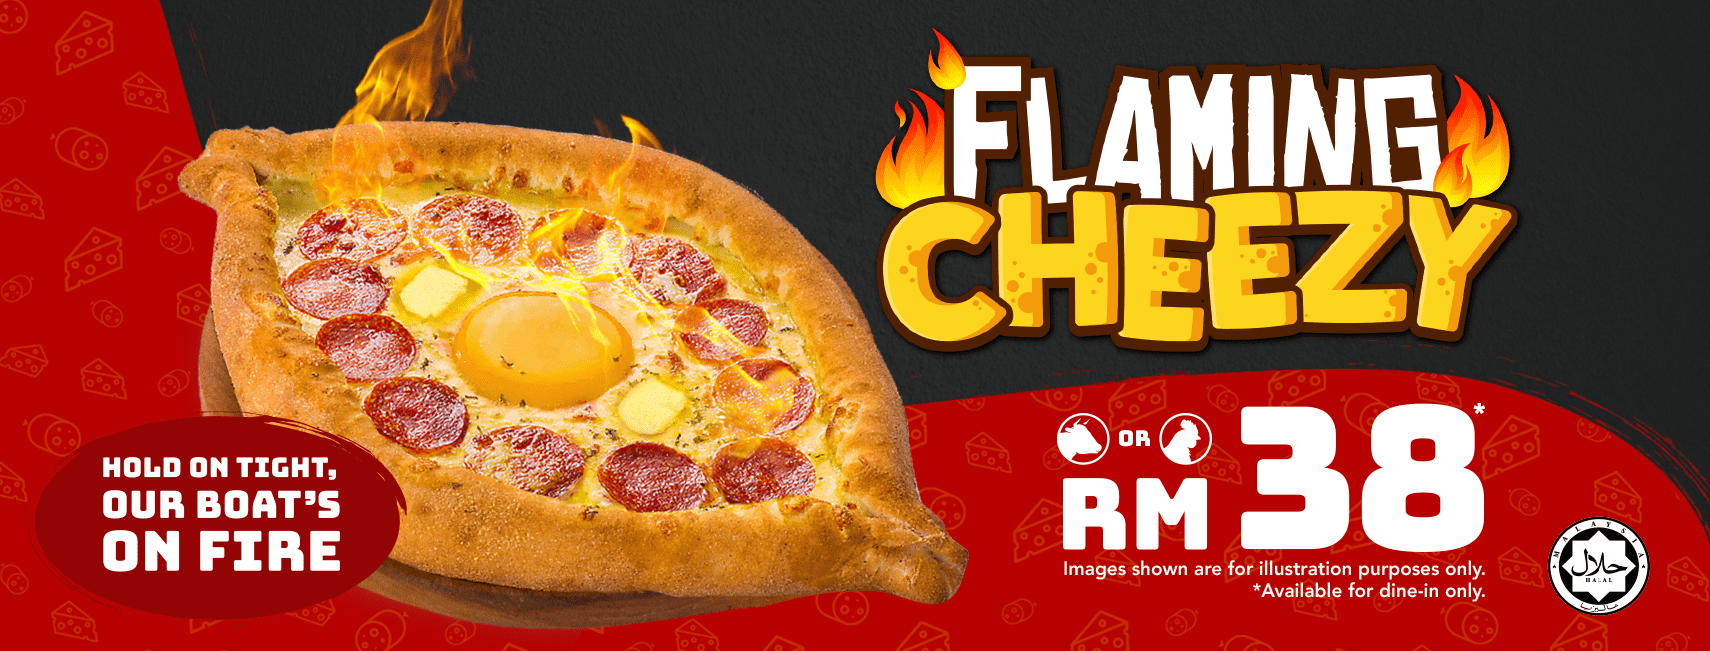 US Pizza Malaysia Promotion Flaming Cheezy